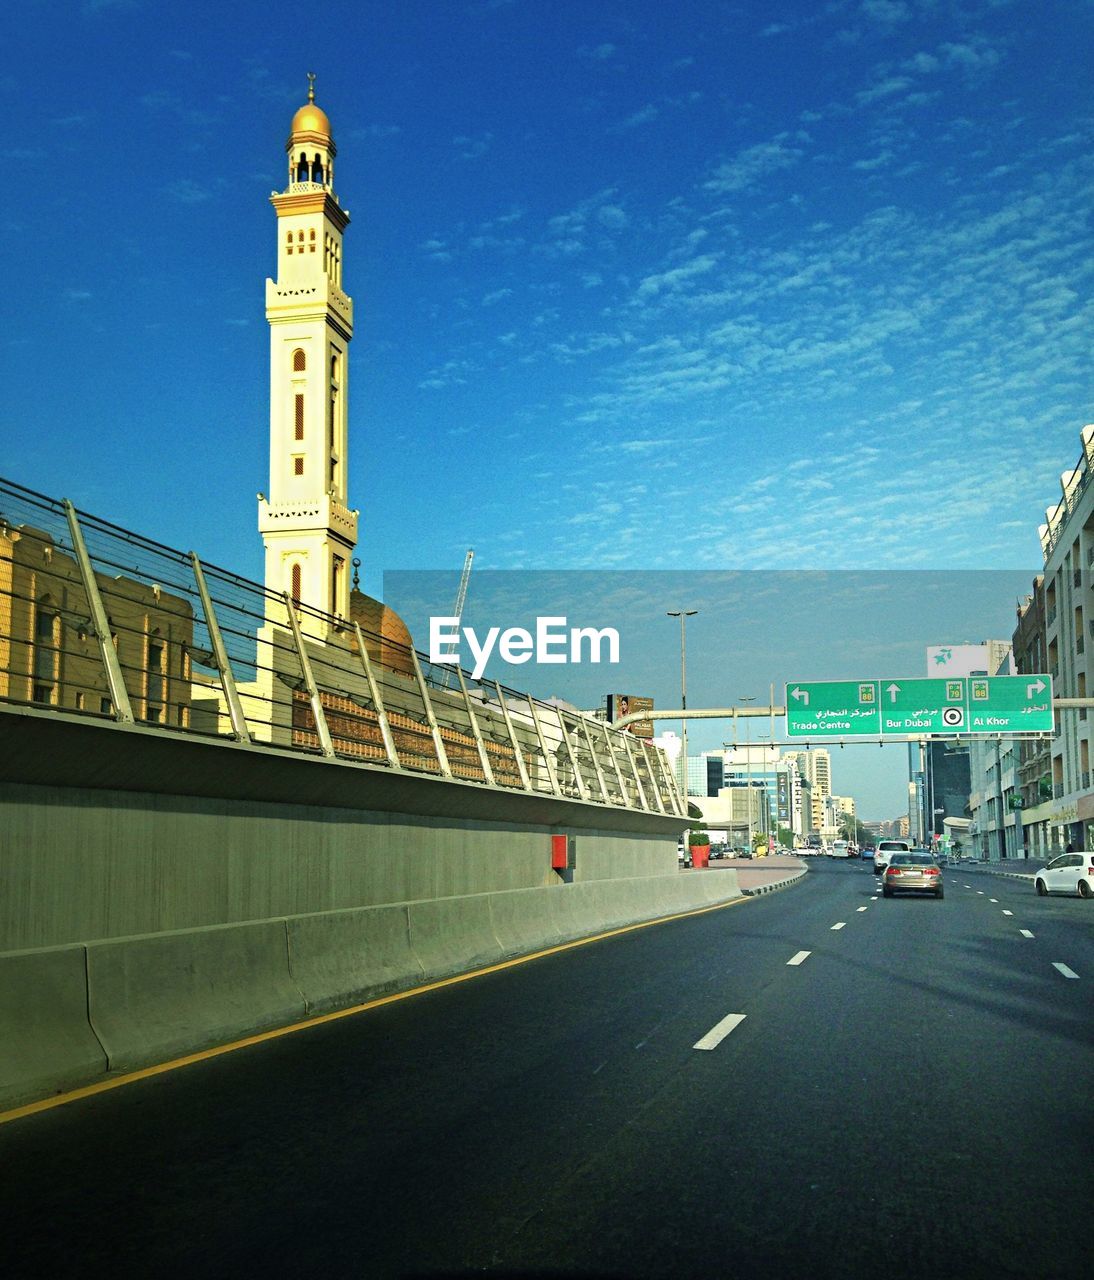 Cars moving on street by minaret against blue sky